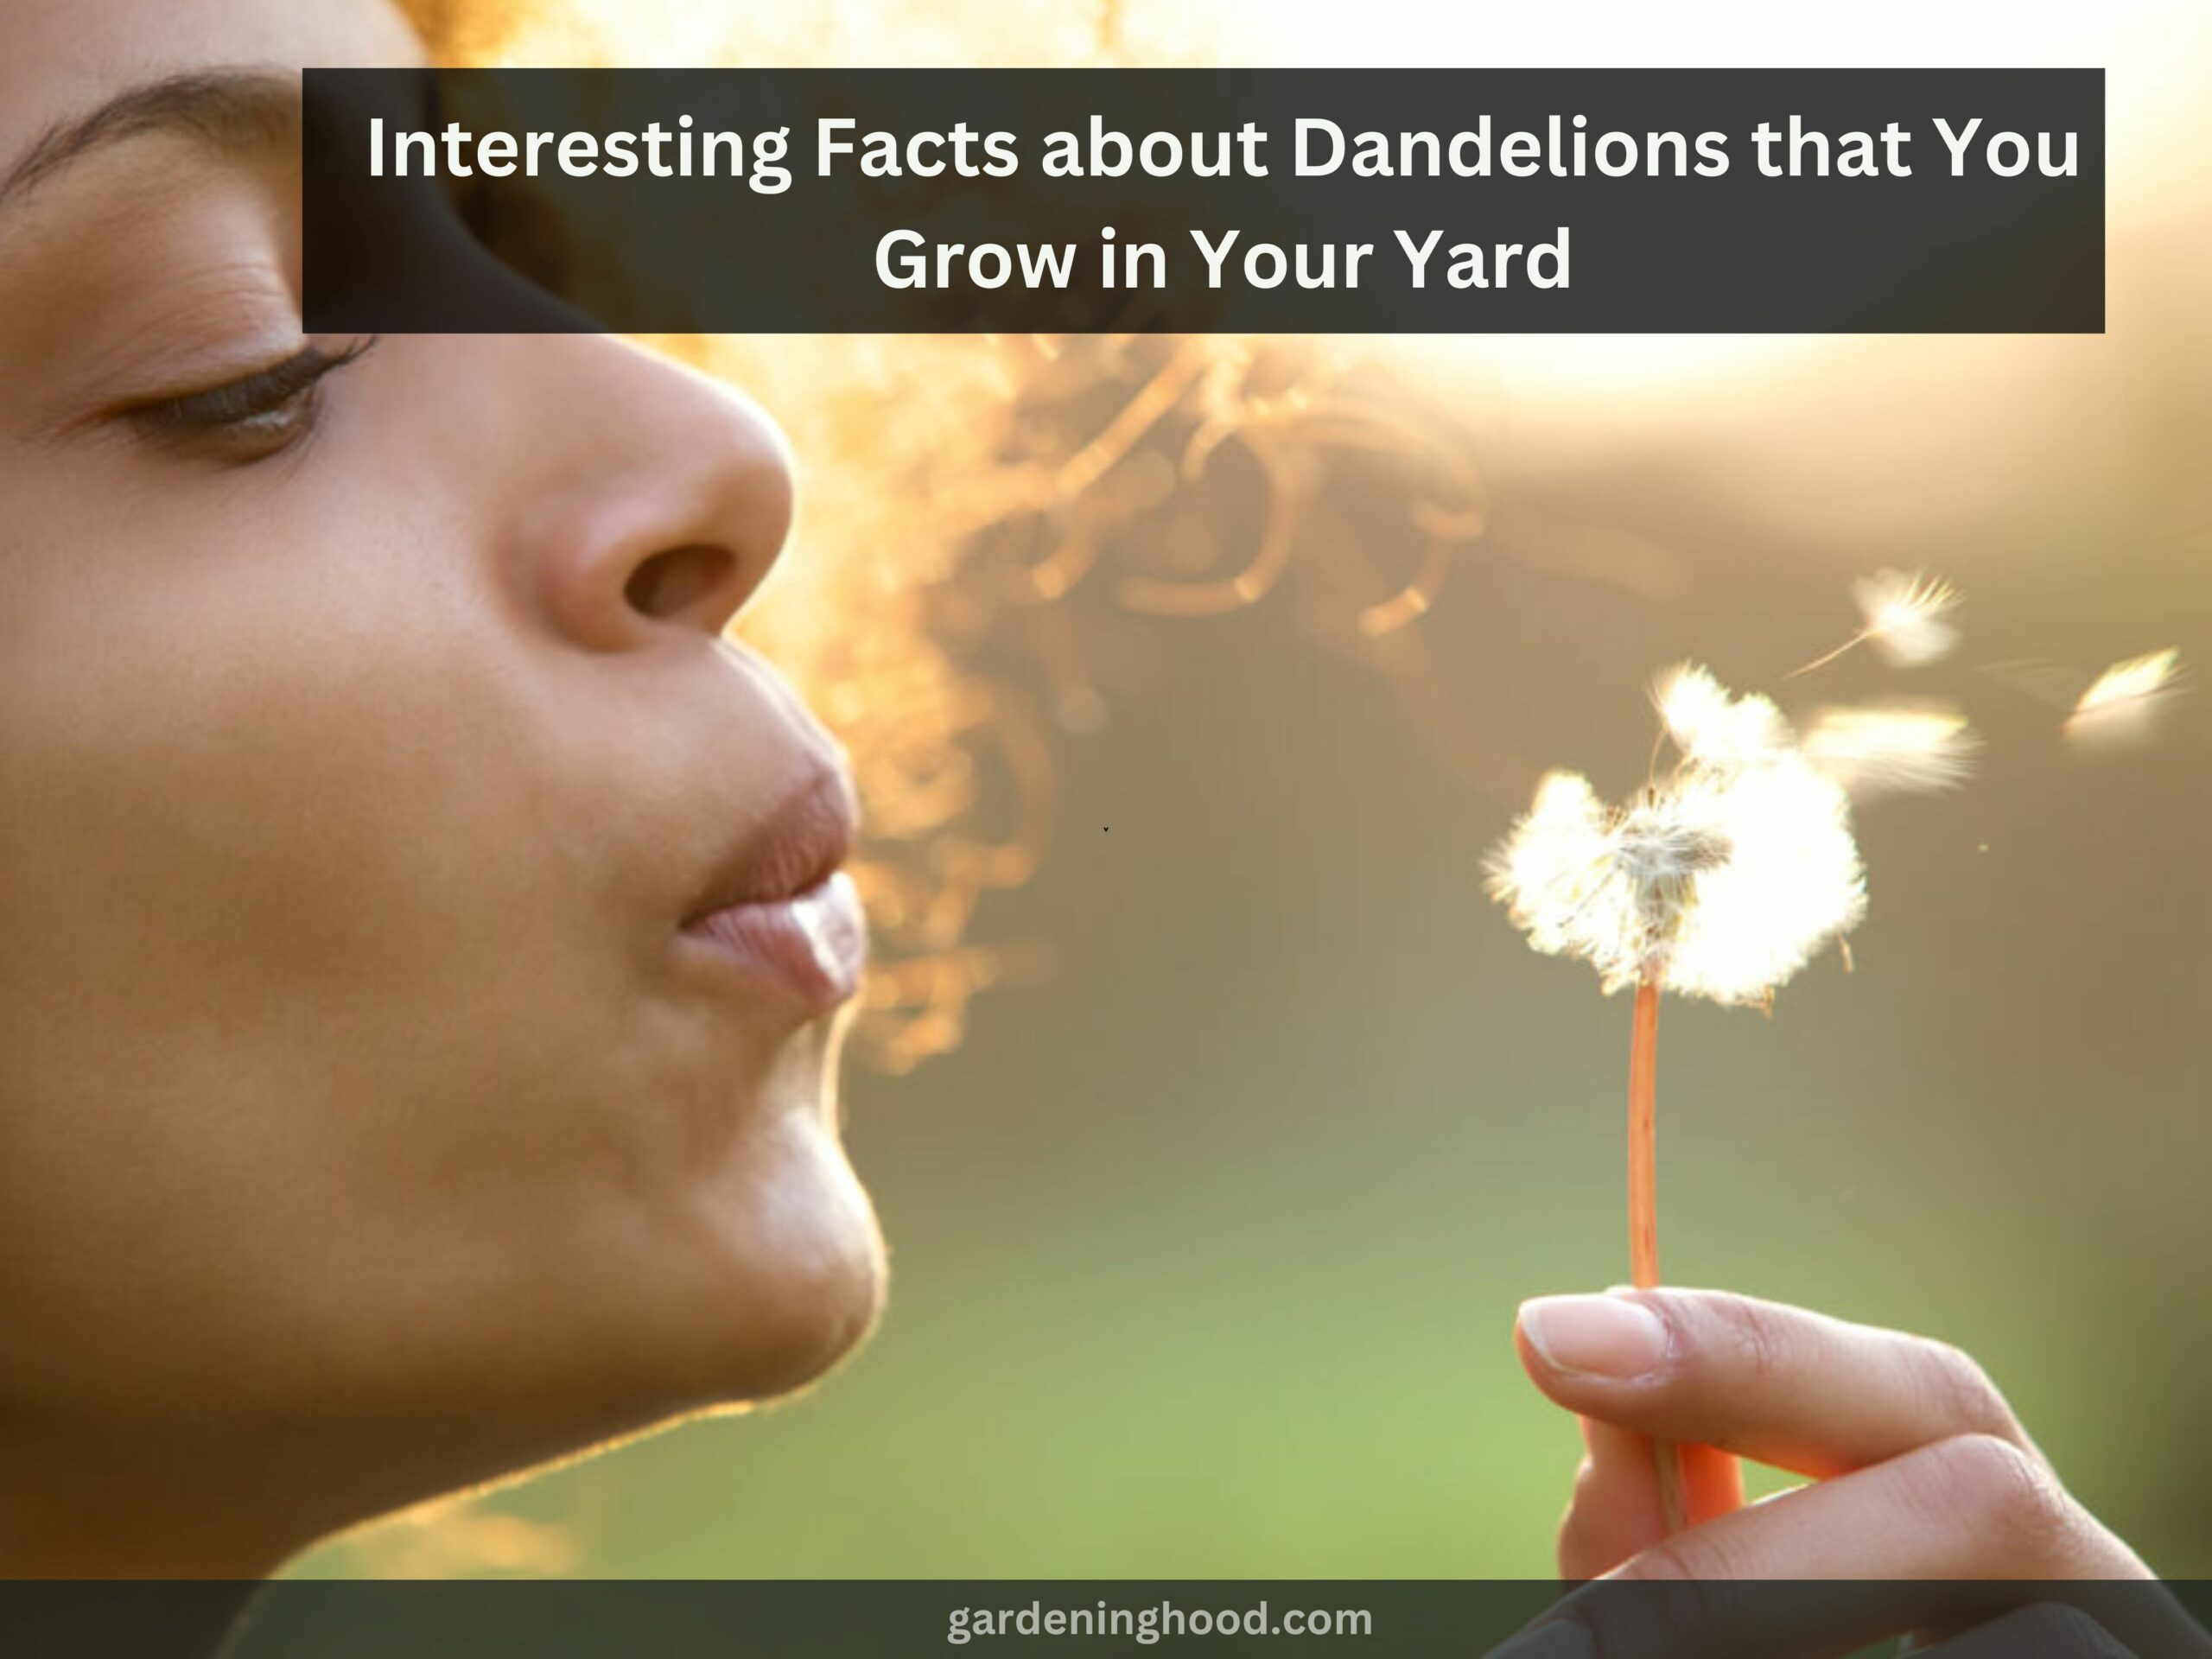 Interesting Facts about Dandelions that You Grow in Your Yard